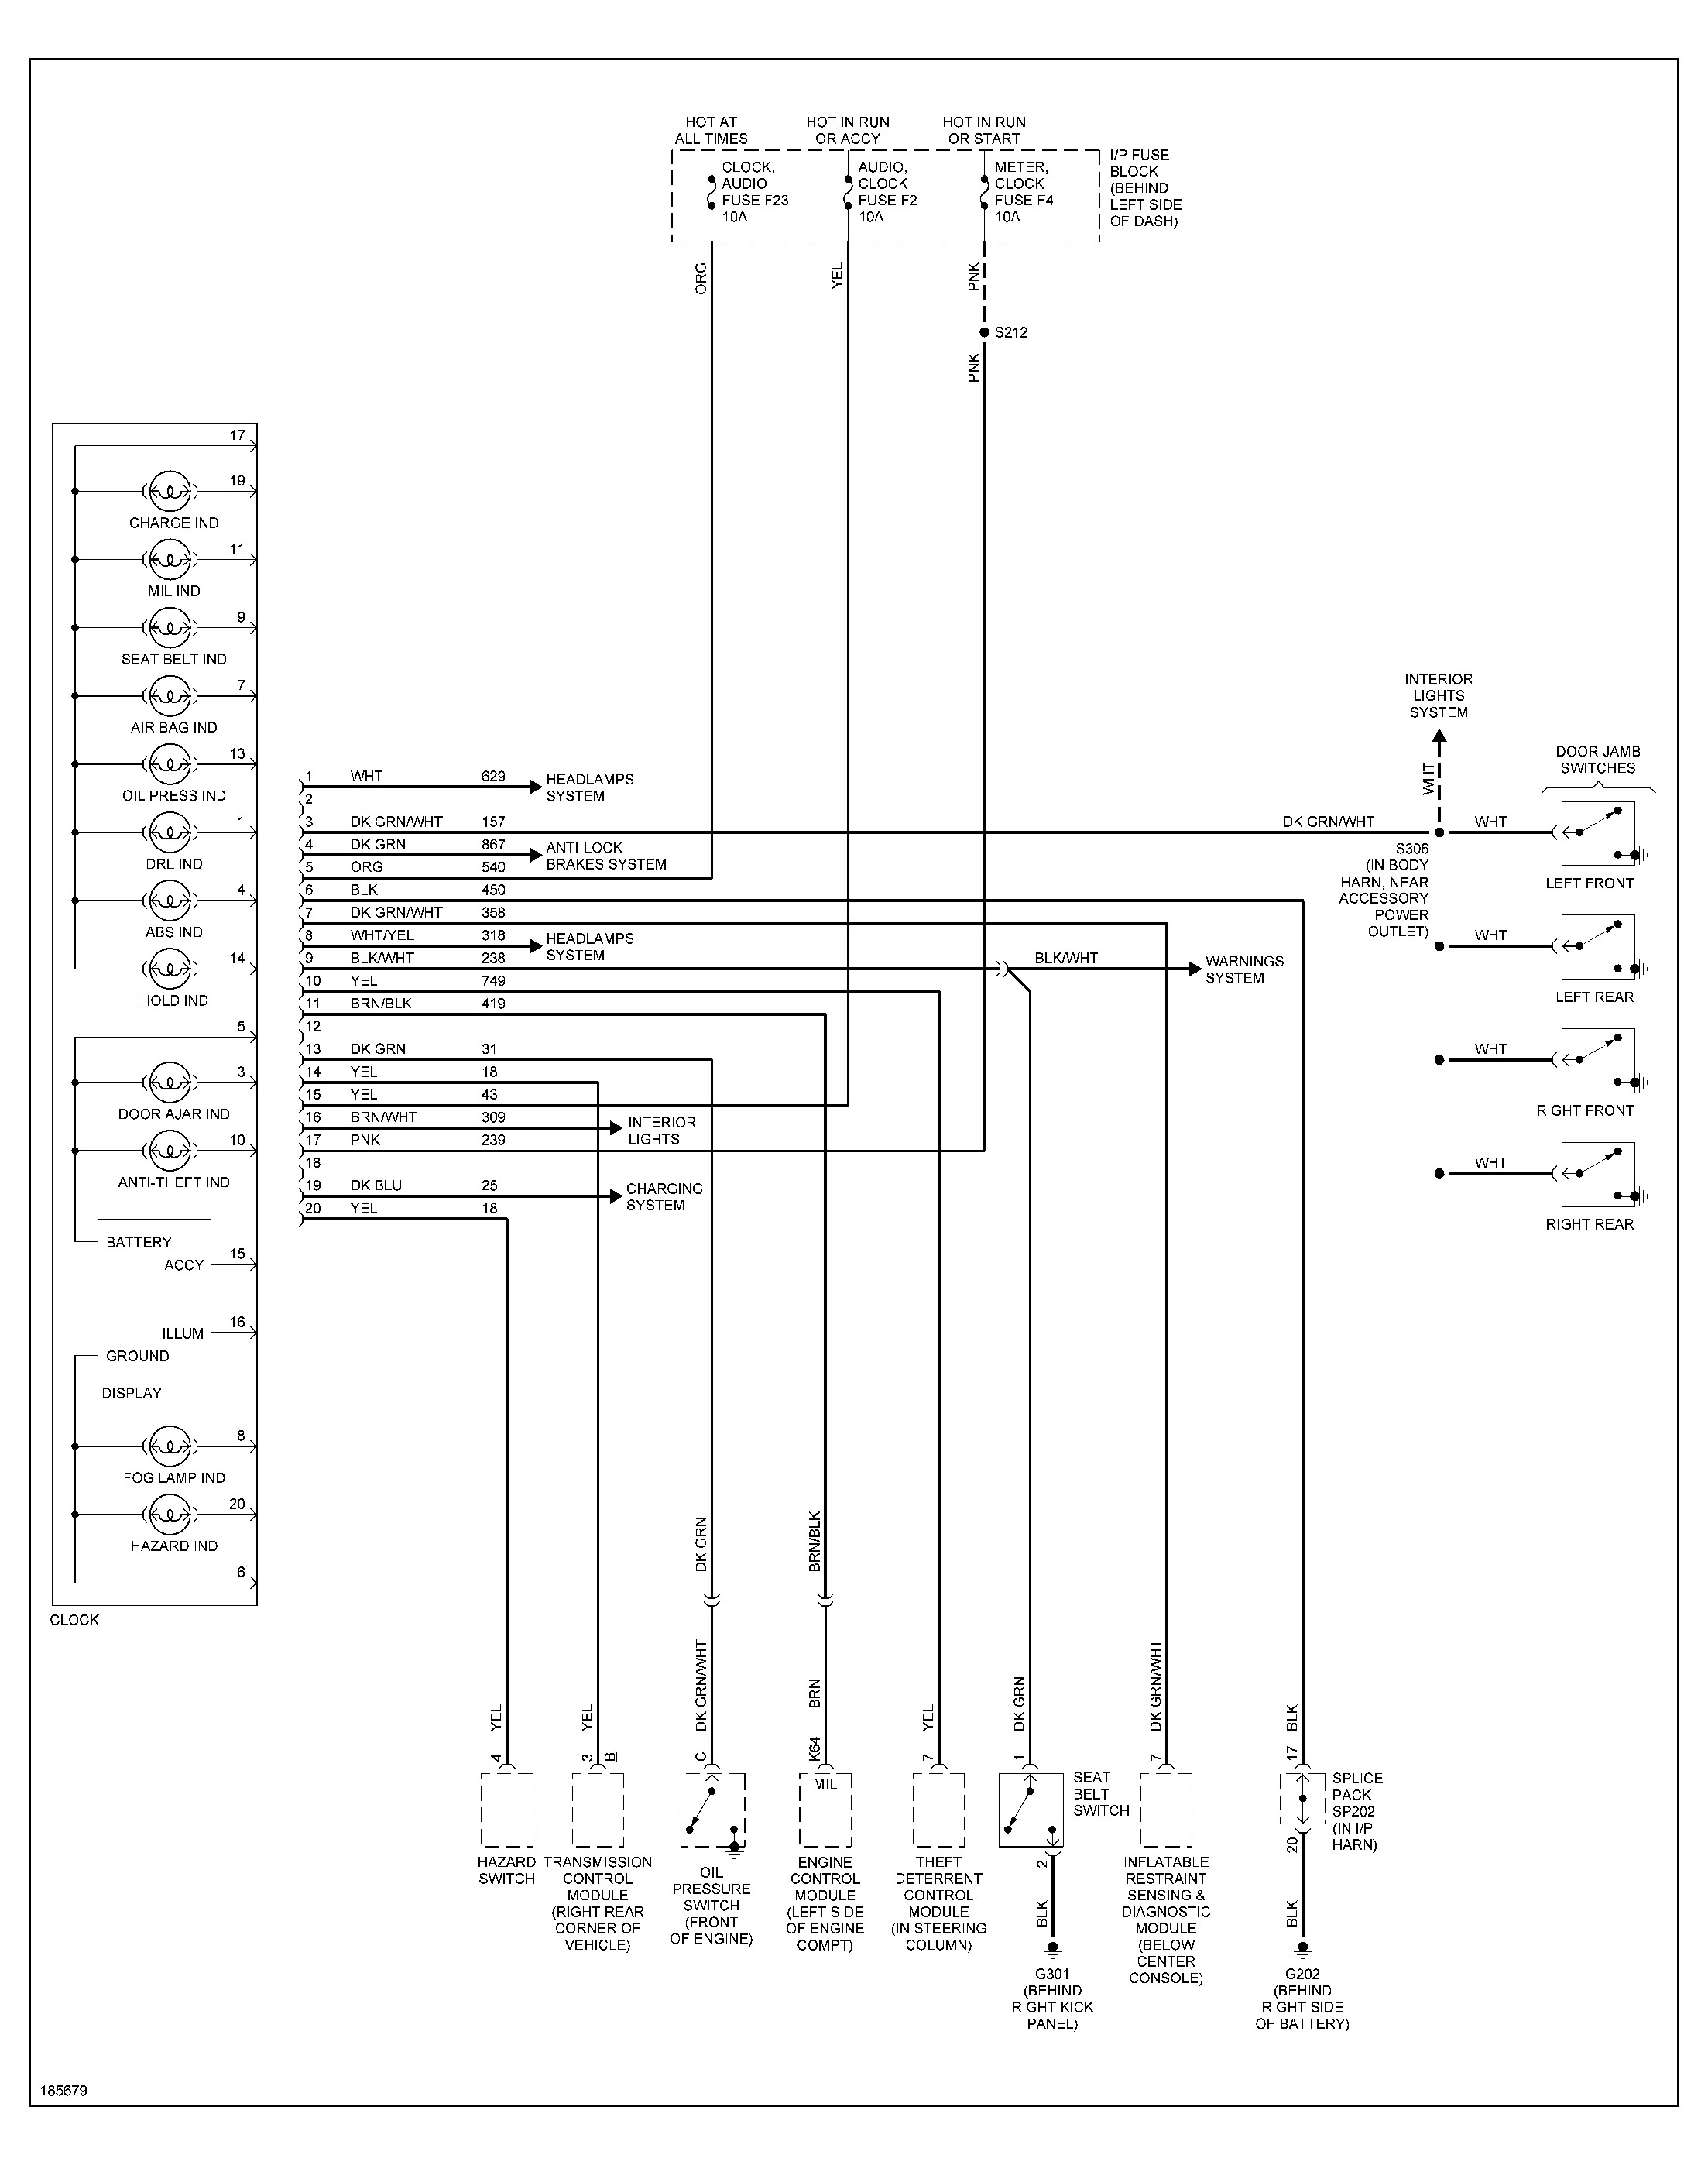 Wiring Diagram for 2009 Chevy Aveo 1.6 Diagram] Chevrolet Optra User Wiring Diagram Full Version Hd Of Wiring Diagram for 2009 Chevy Aveo 1.6